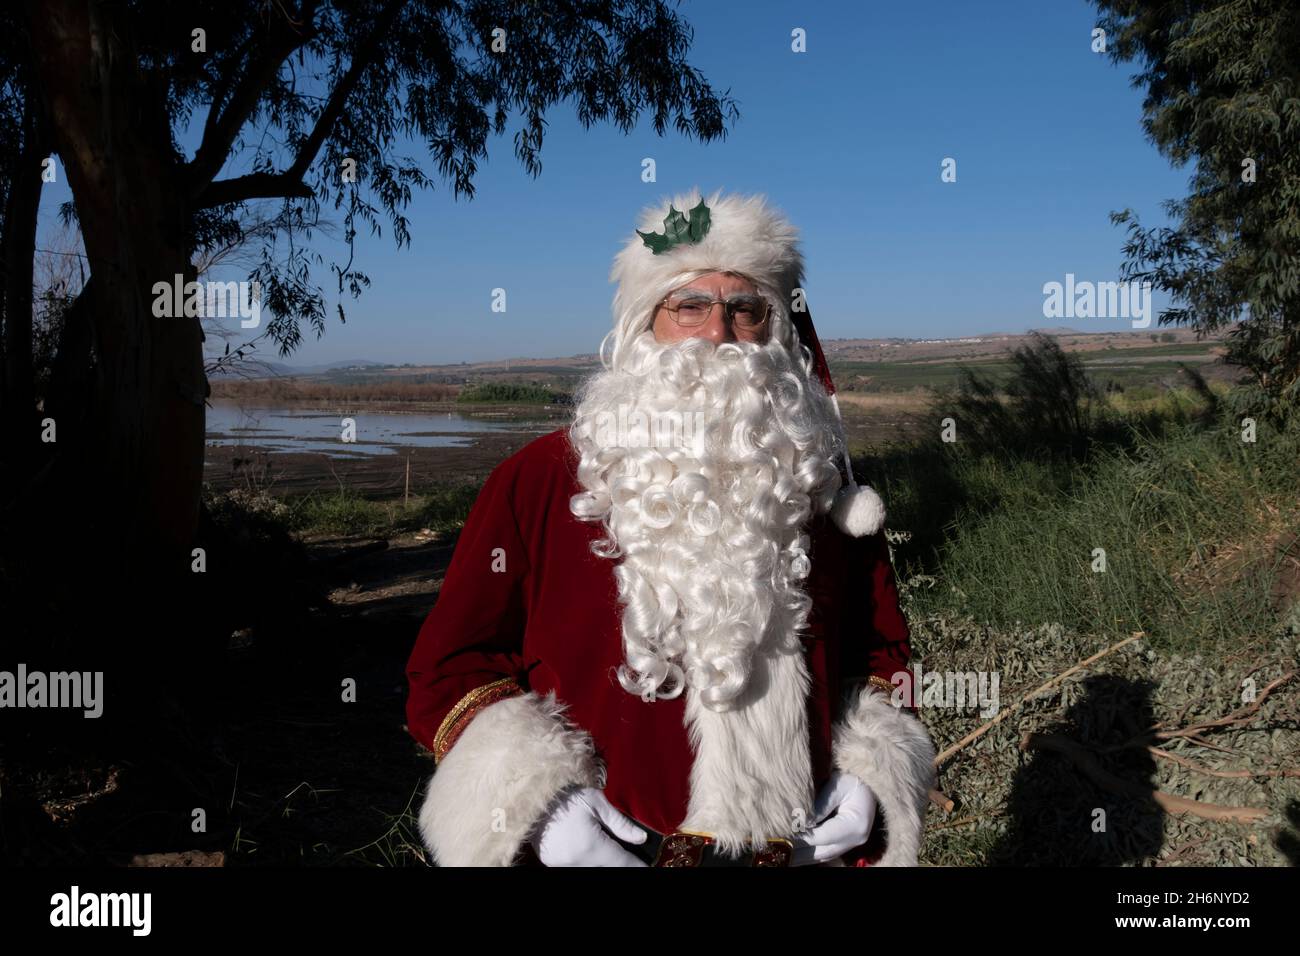 Issa Kassissieh, an Arab Orthodox Christian and Israel’s only certified Santa Claus, at the eastern side of the Sea of Galilee in Israel. Stock Photo